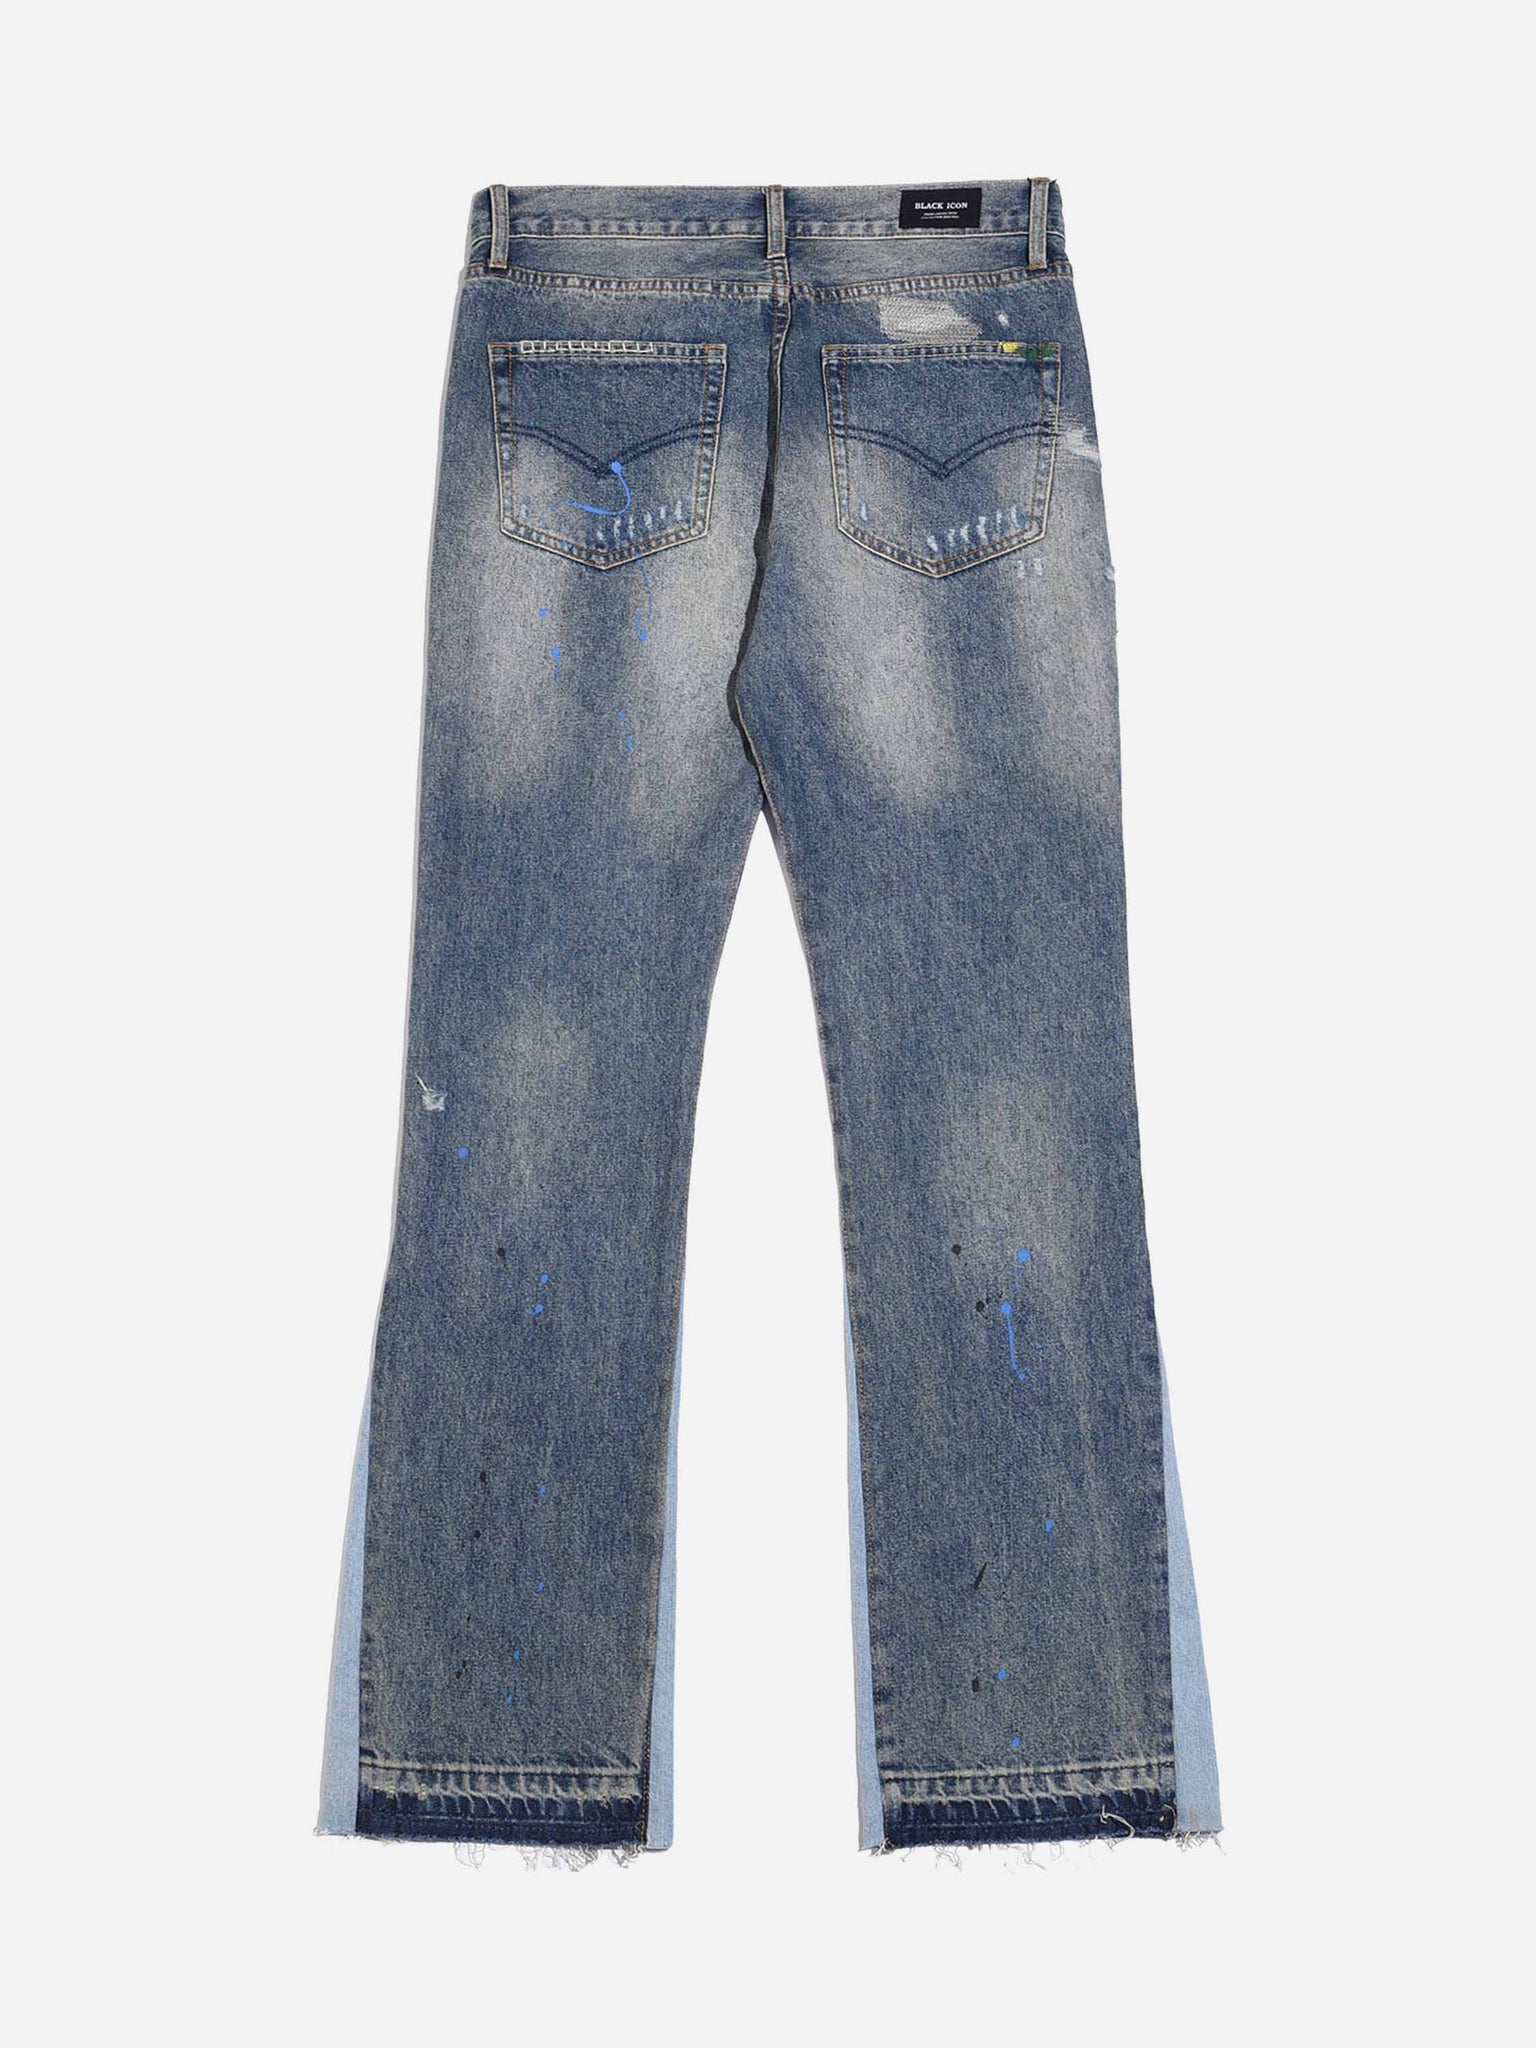 Thesupermade Splashing Ink Patchwork Jeans